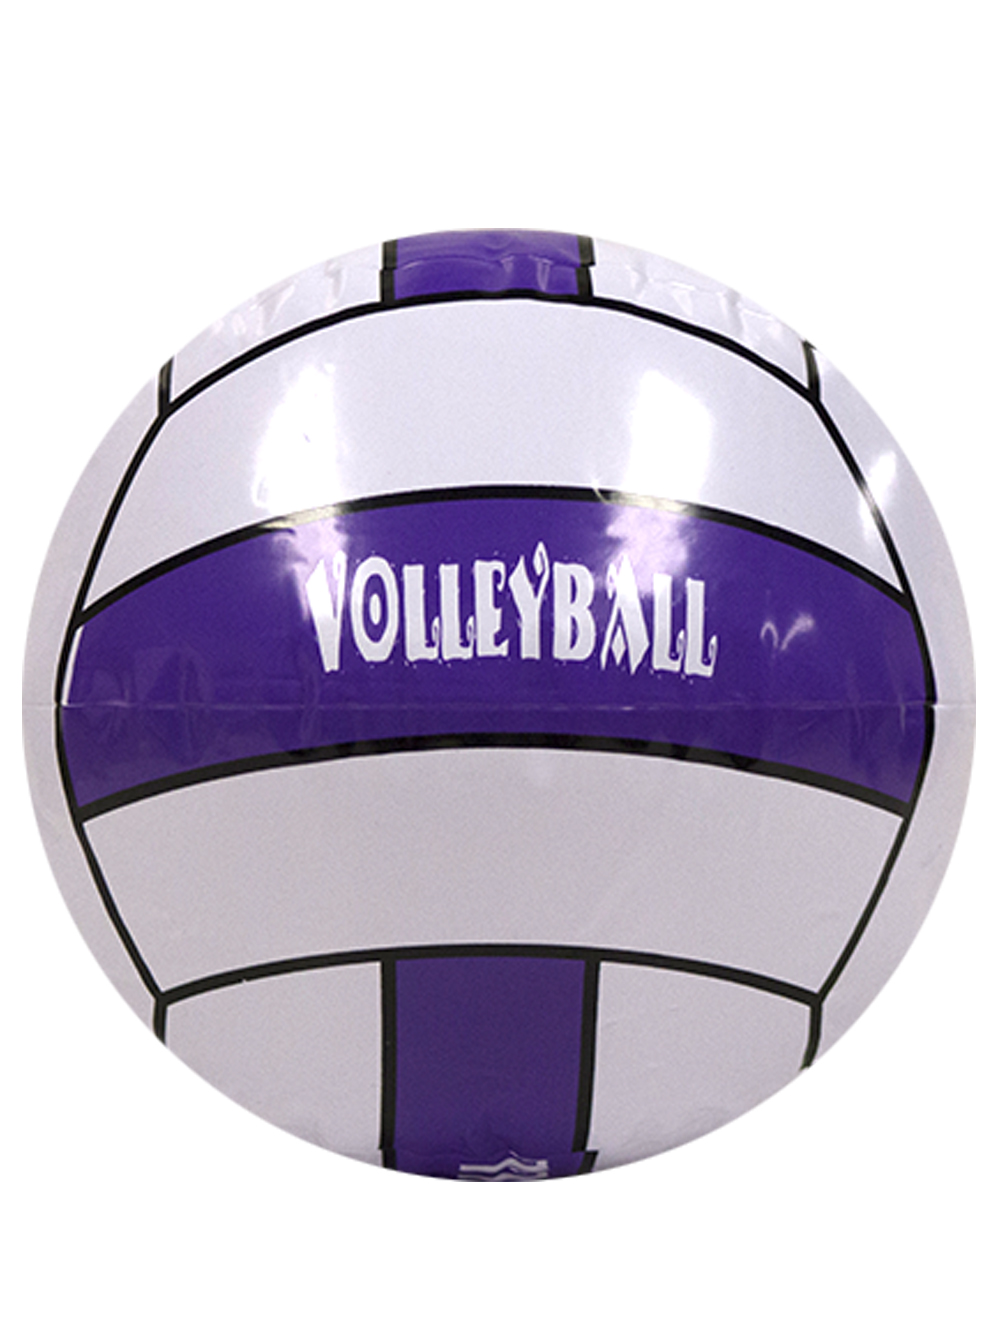 Volleyball Beach Ball | Midwest Volleyball Warehouse